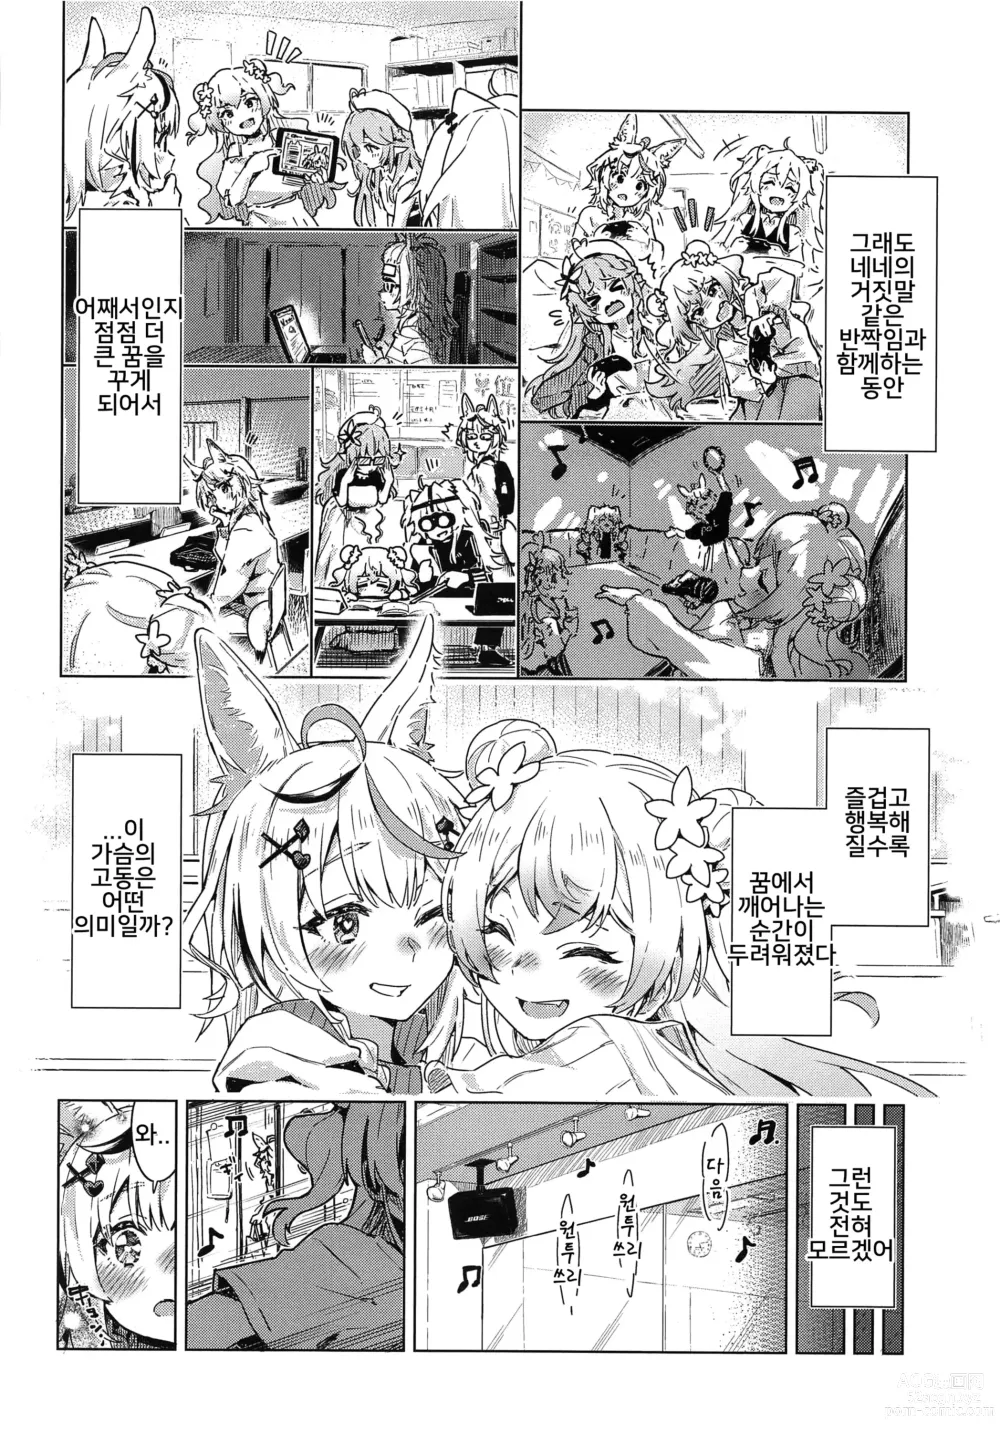 Page 5 of doujinshi Fennec wa Iseijin no Yume o Miru ka - Does The Fennec Dream of The Lovely Visitor?